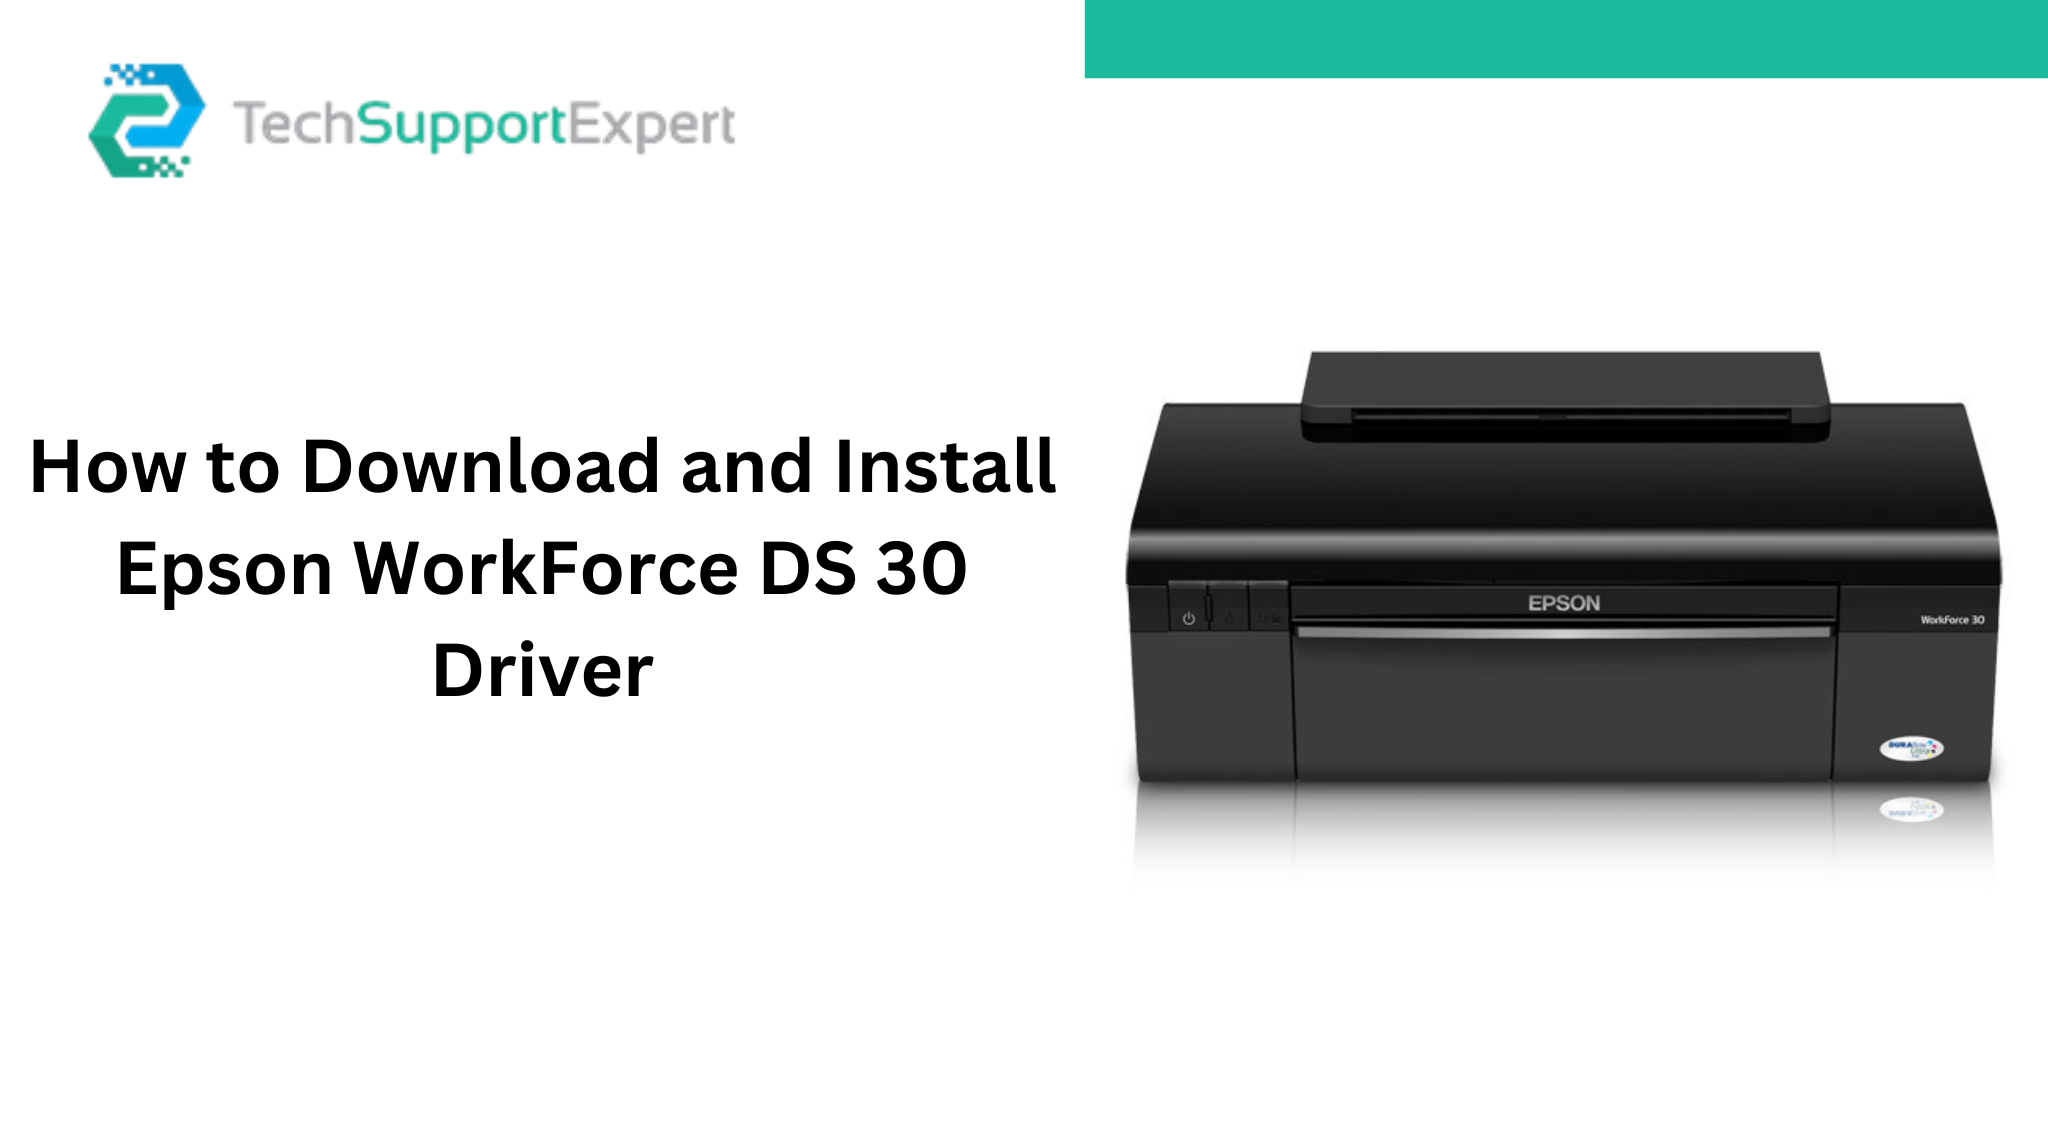 How to Download and Install Epson DS 30 Driver